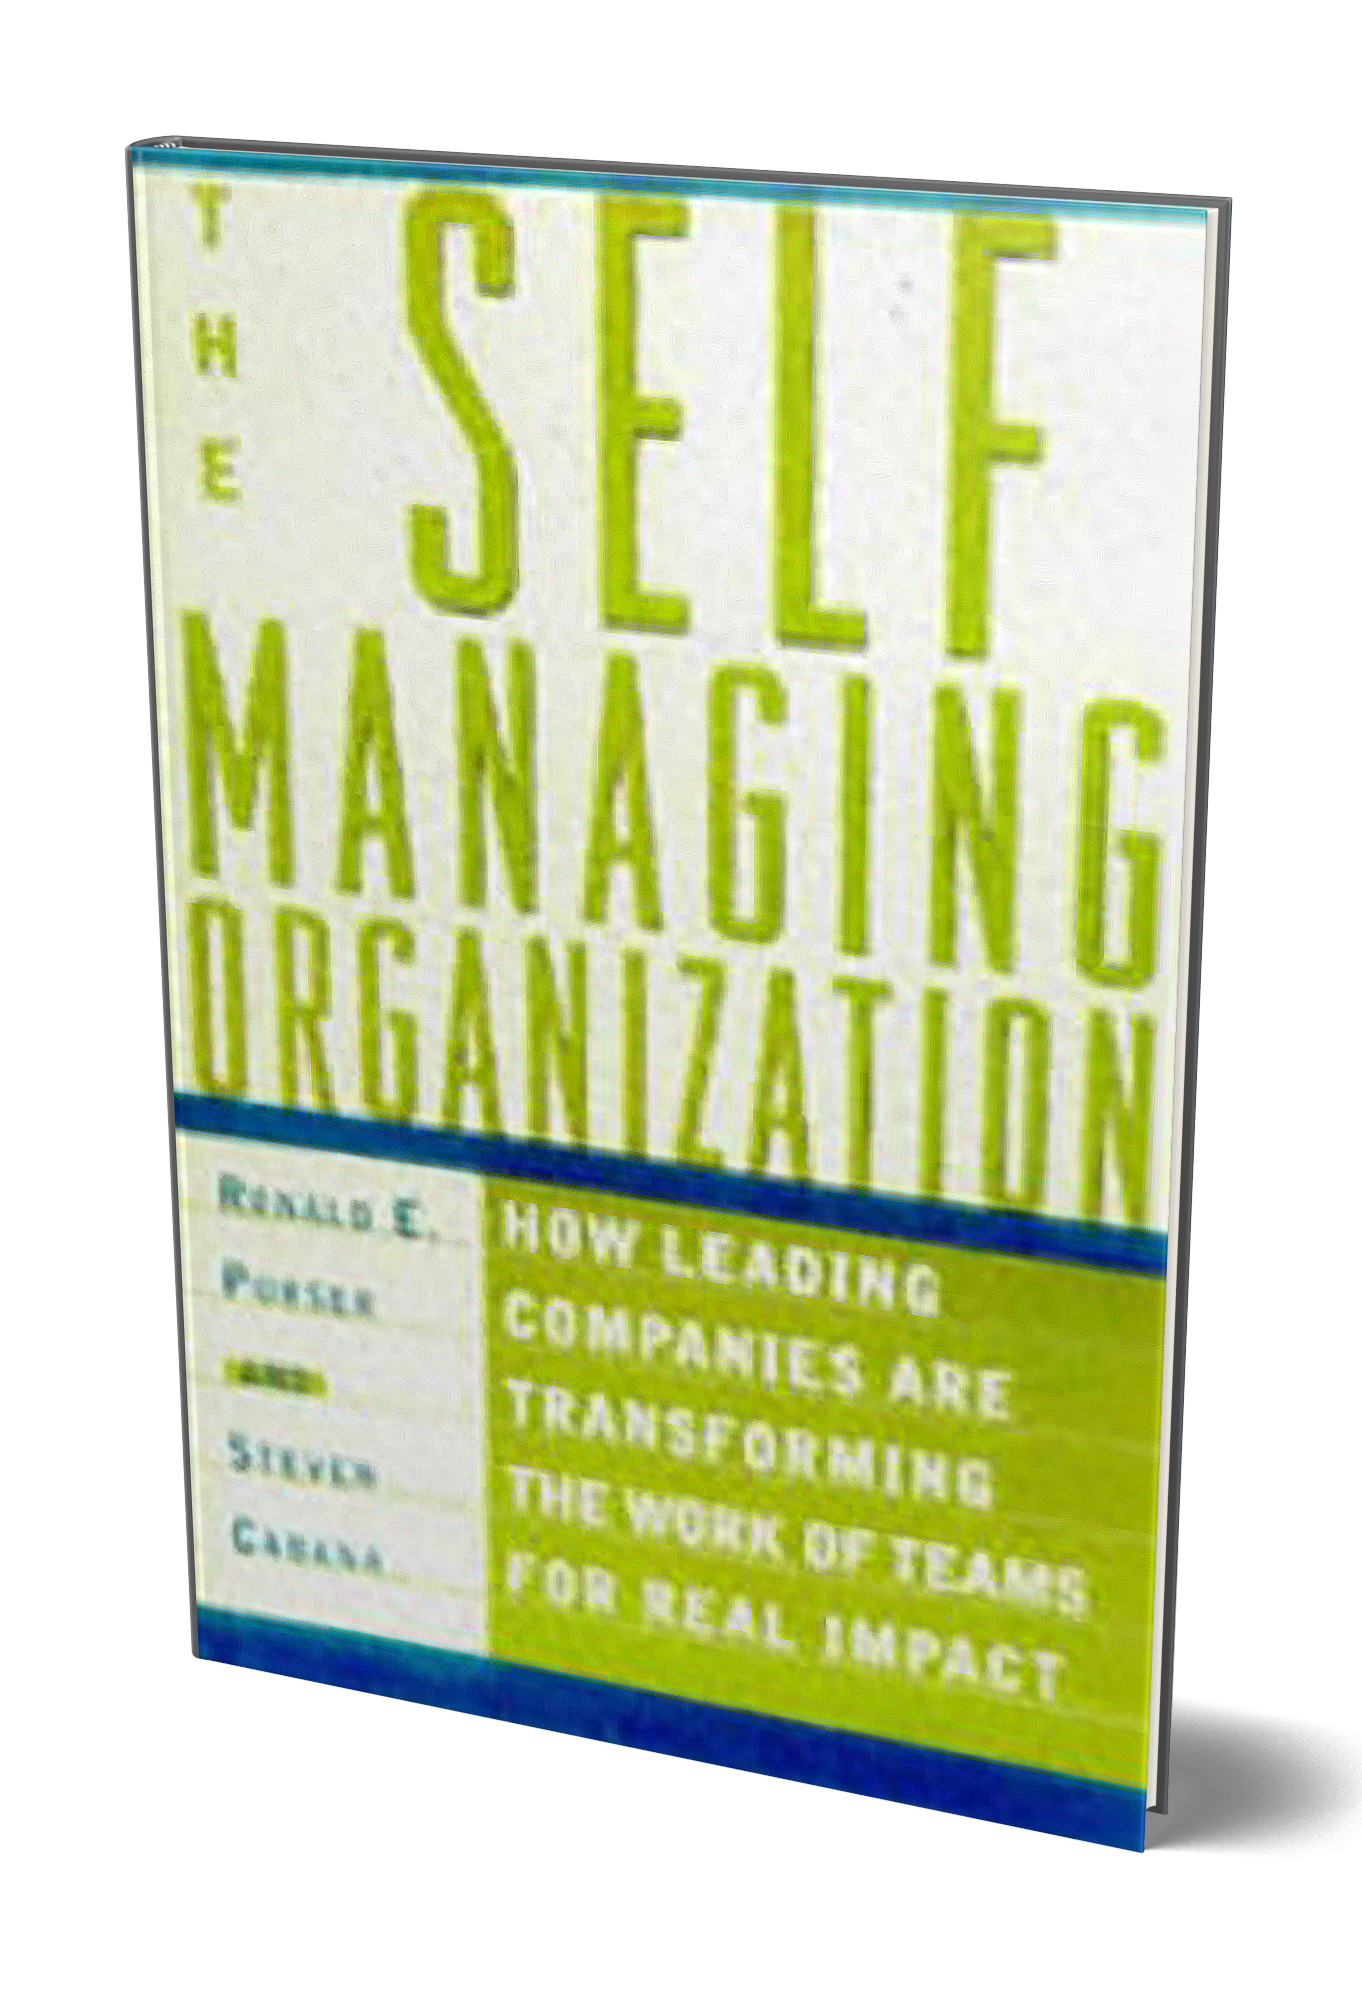 The Self-Managing Organization : How Leading Companies Are Transforming the Work of Teams for Real Impact